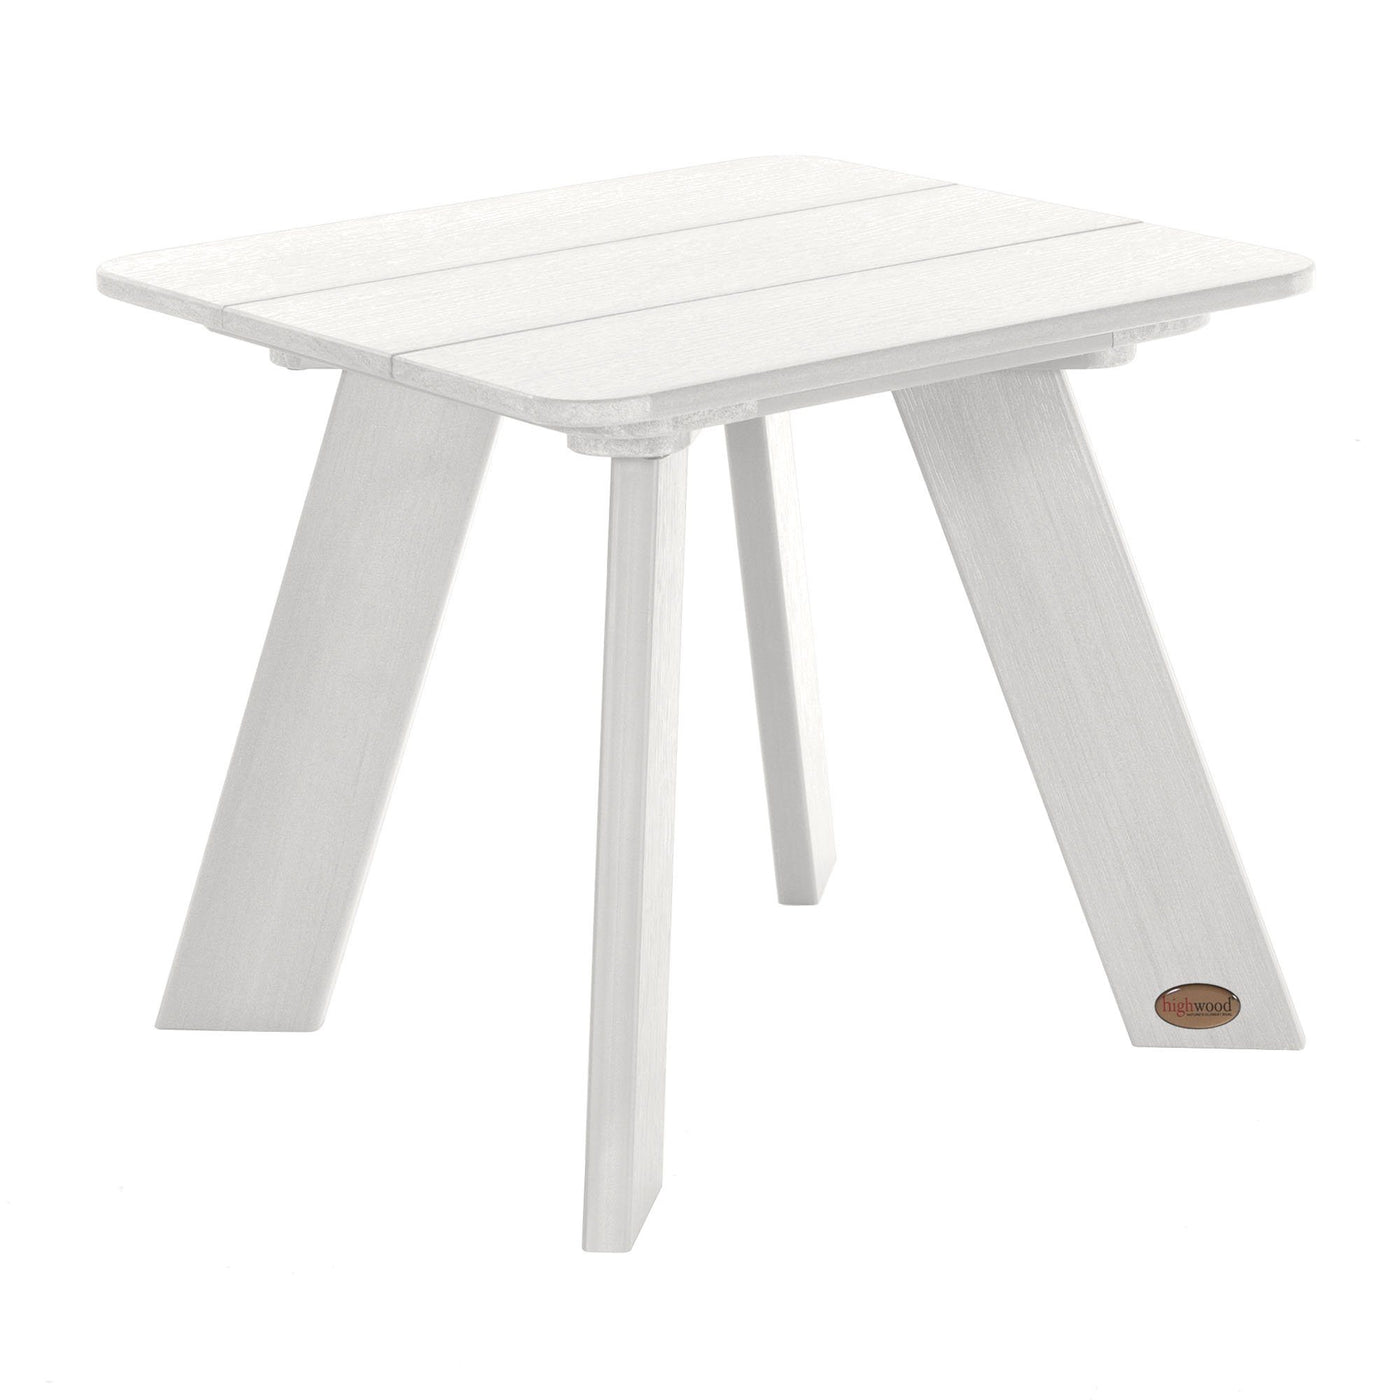 Italica Modern Side table in White